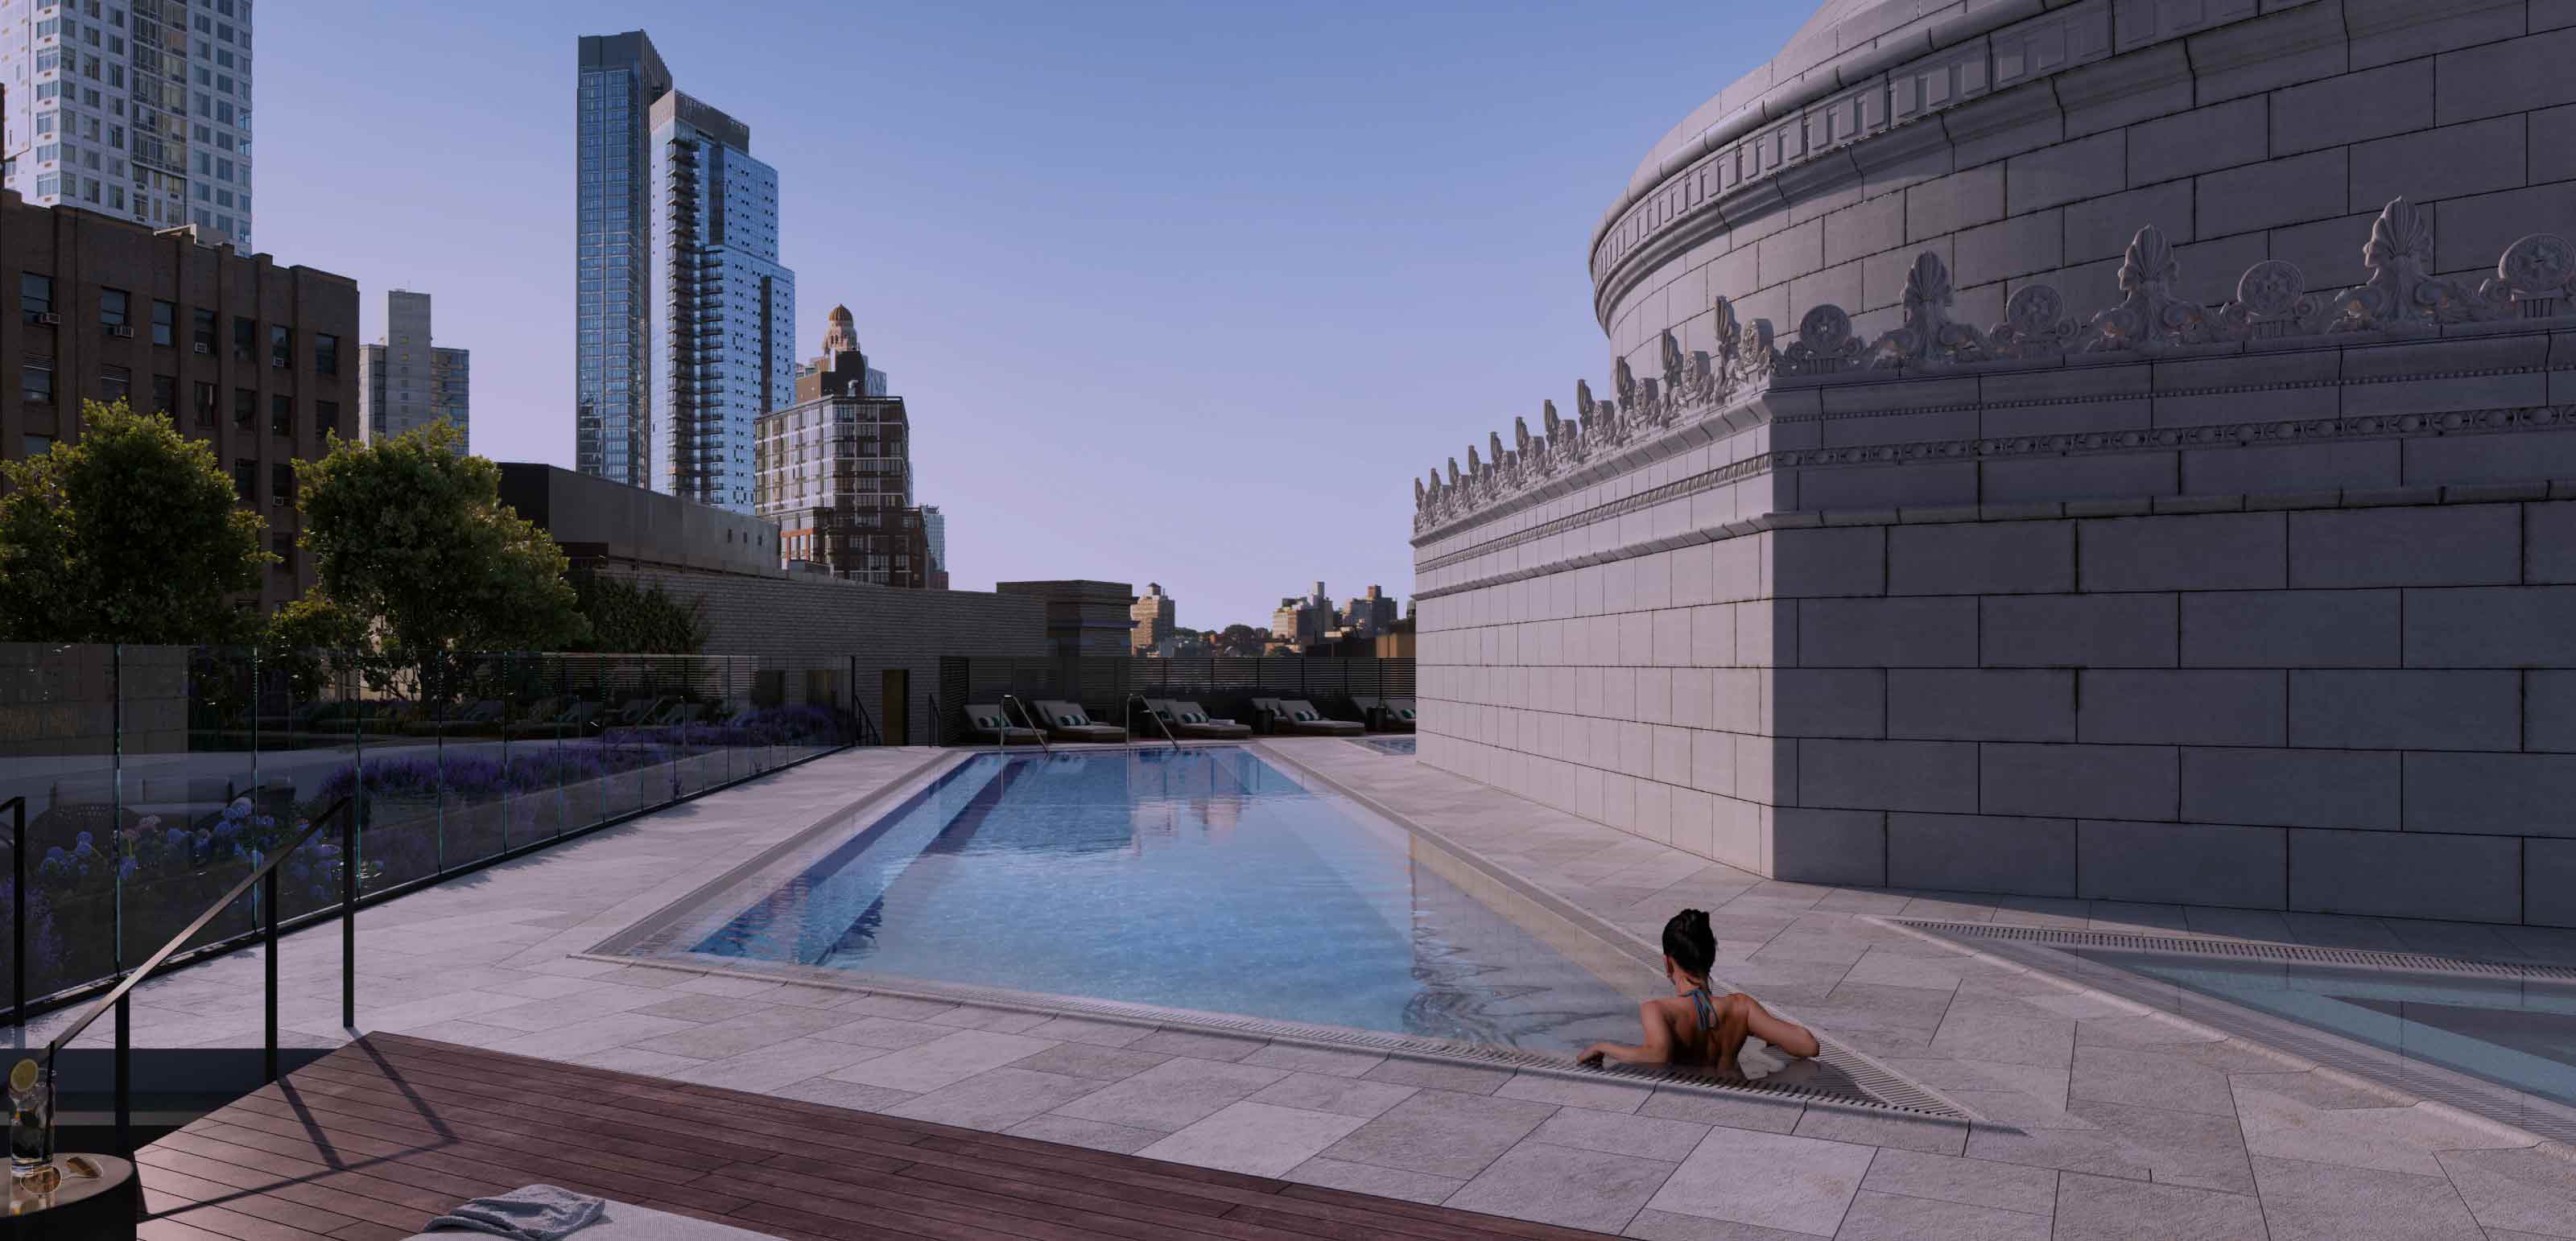 A woman sitting in an outdoor pool looking over the city view